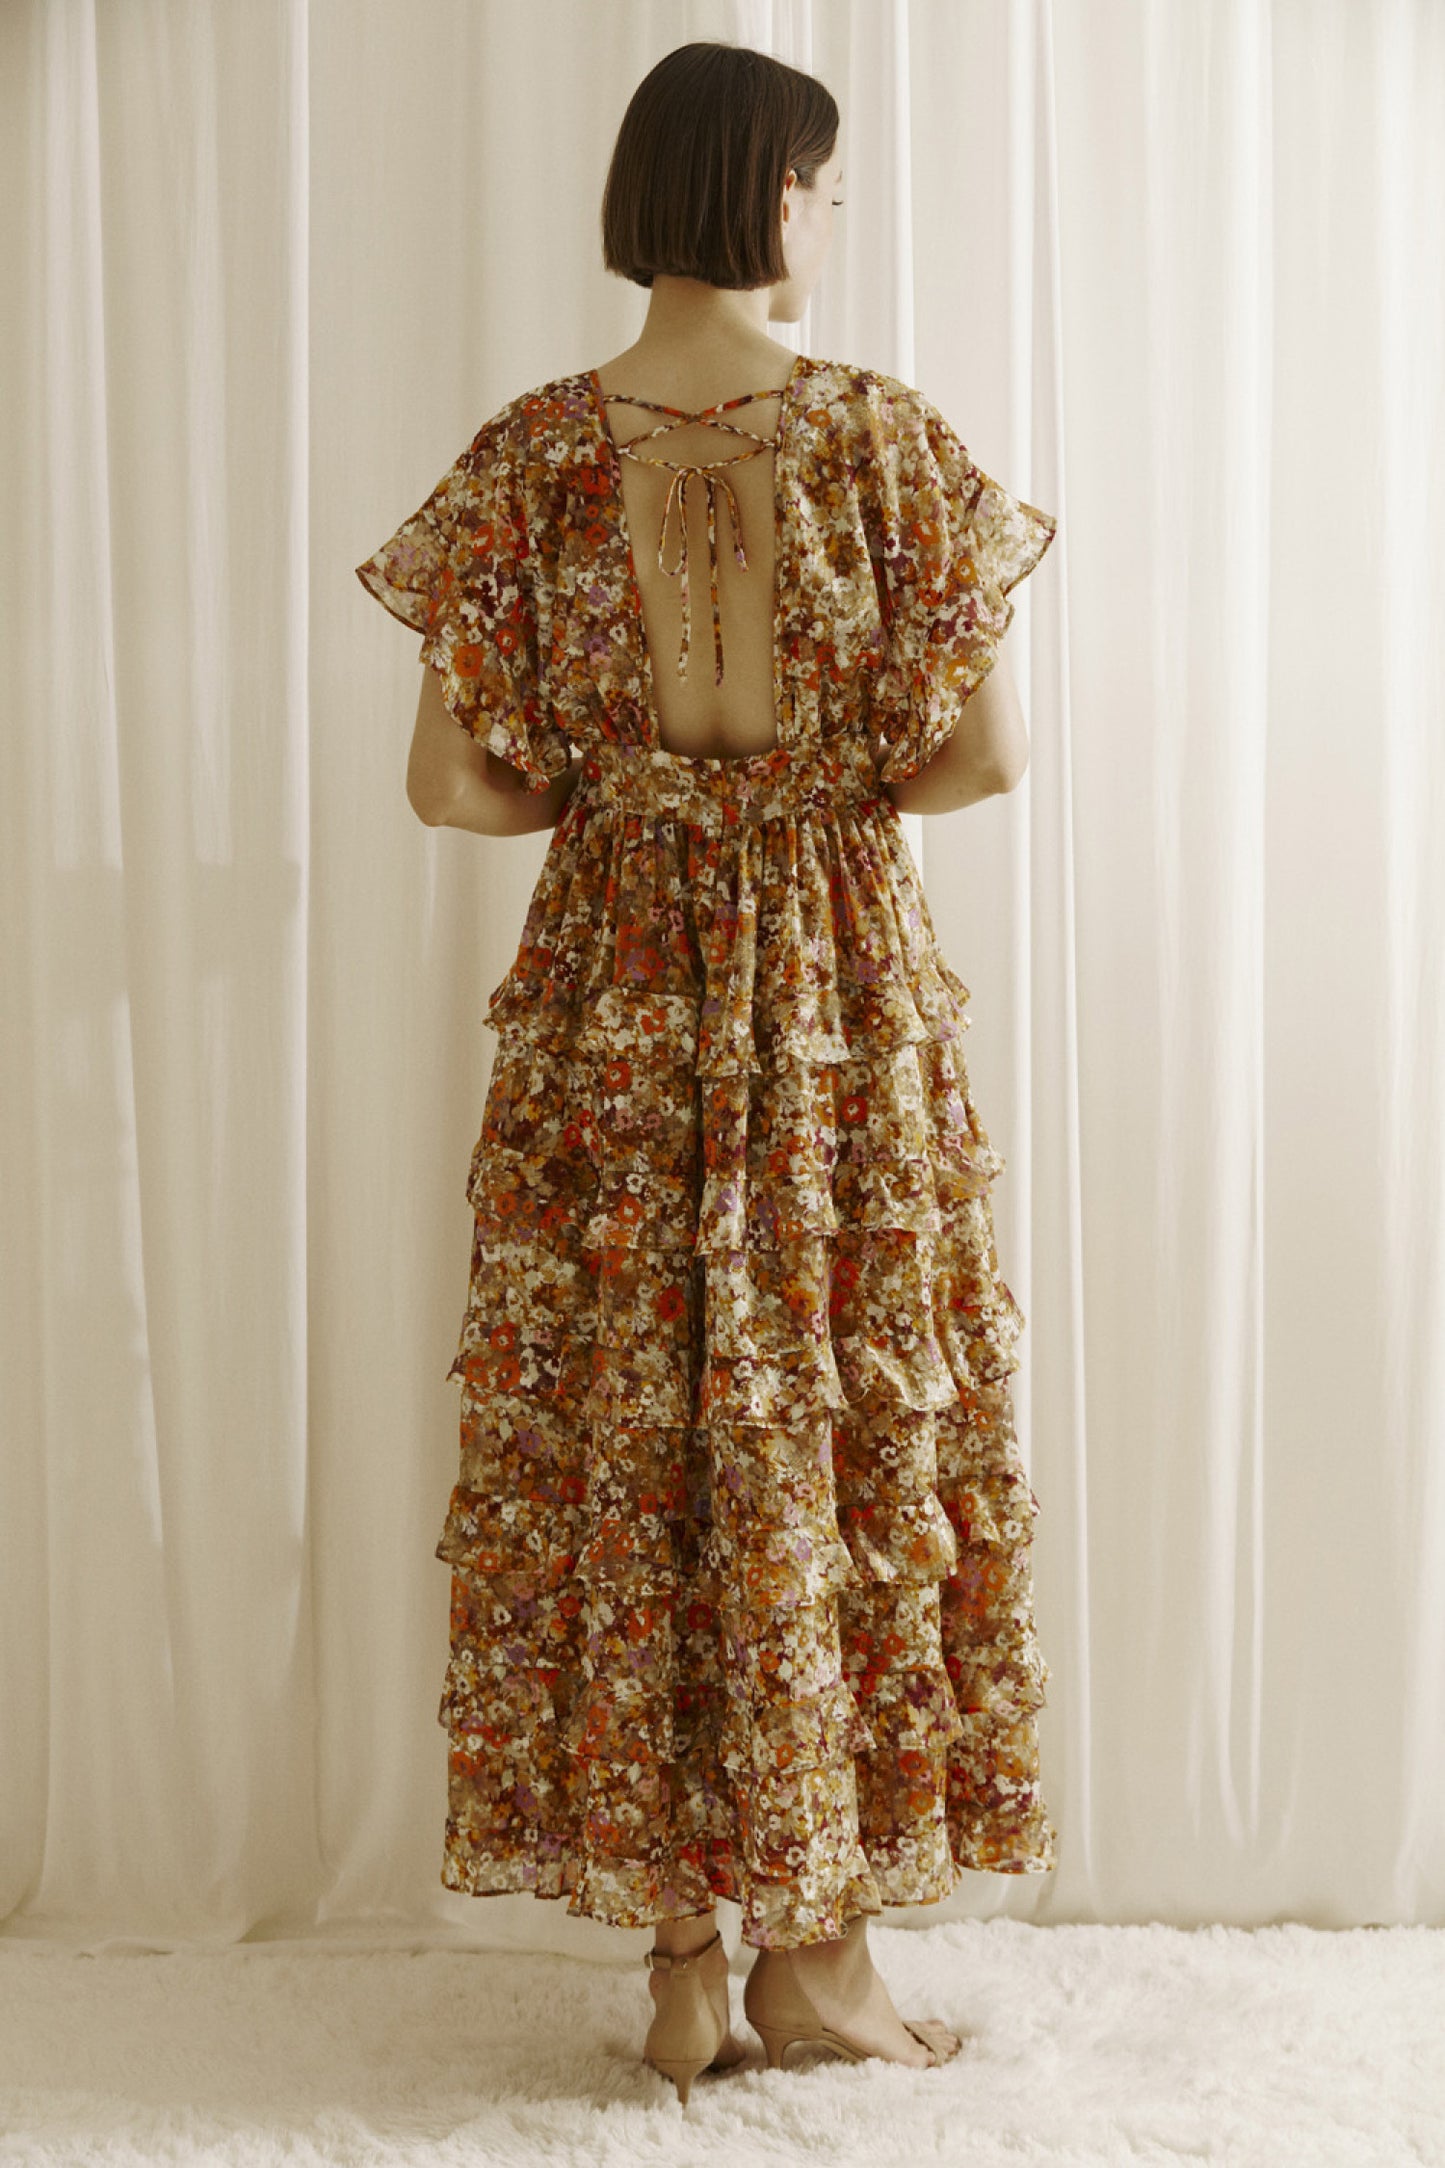 Ditsy floral print midi dress multicolor. Prominent browns, oranges, purples, and maroons.  It shows a deep v-neckline, short fluttered, ruffled sleeves, and a cinched empire waist with center buttons. It also has a ruffled, tiered layered, midi bottom and an open back with a crisscross back tie..  Back full view.